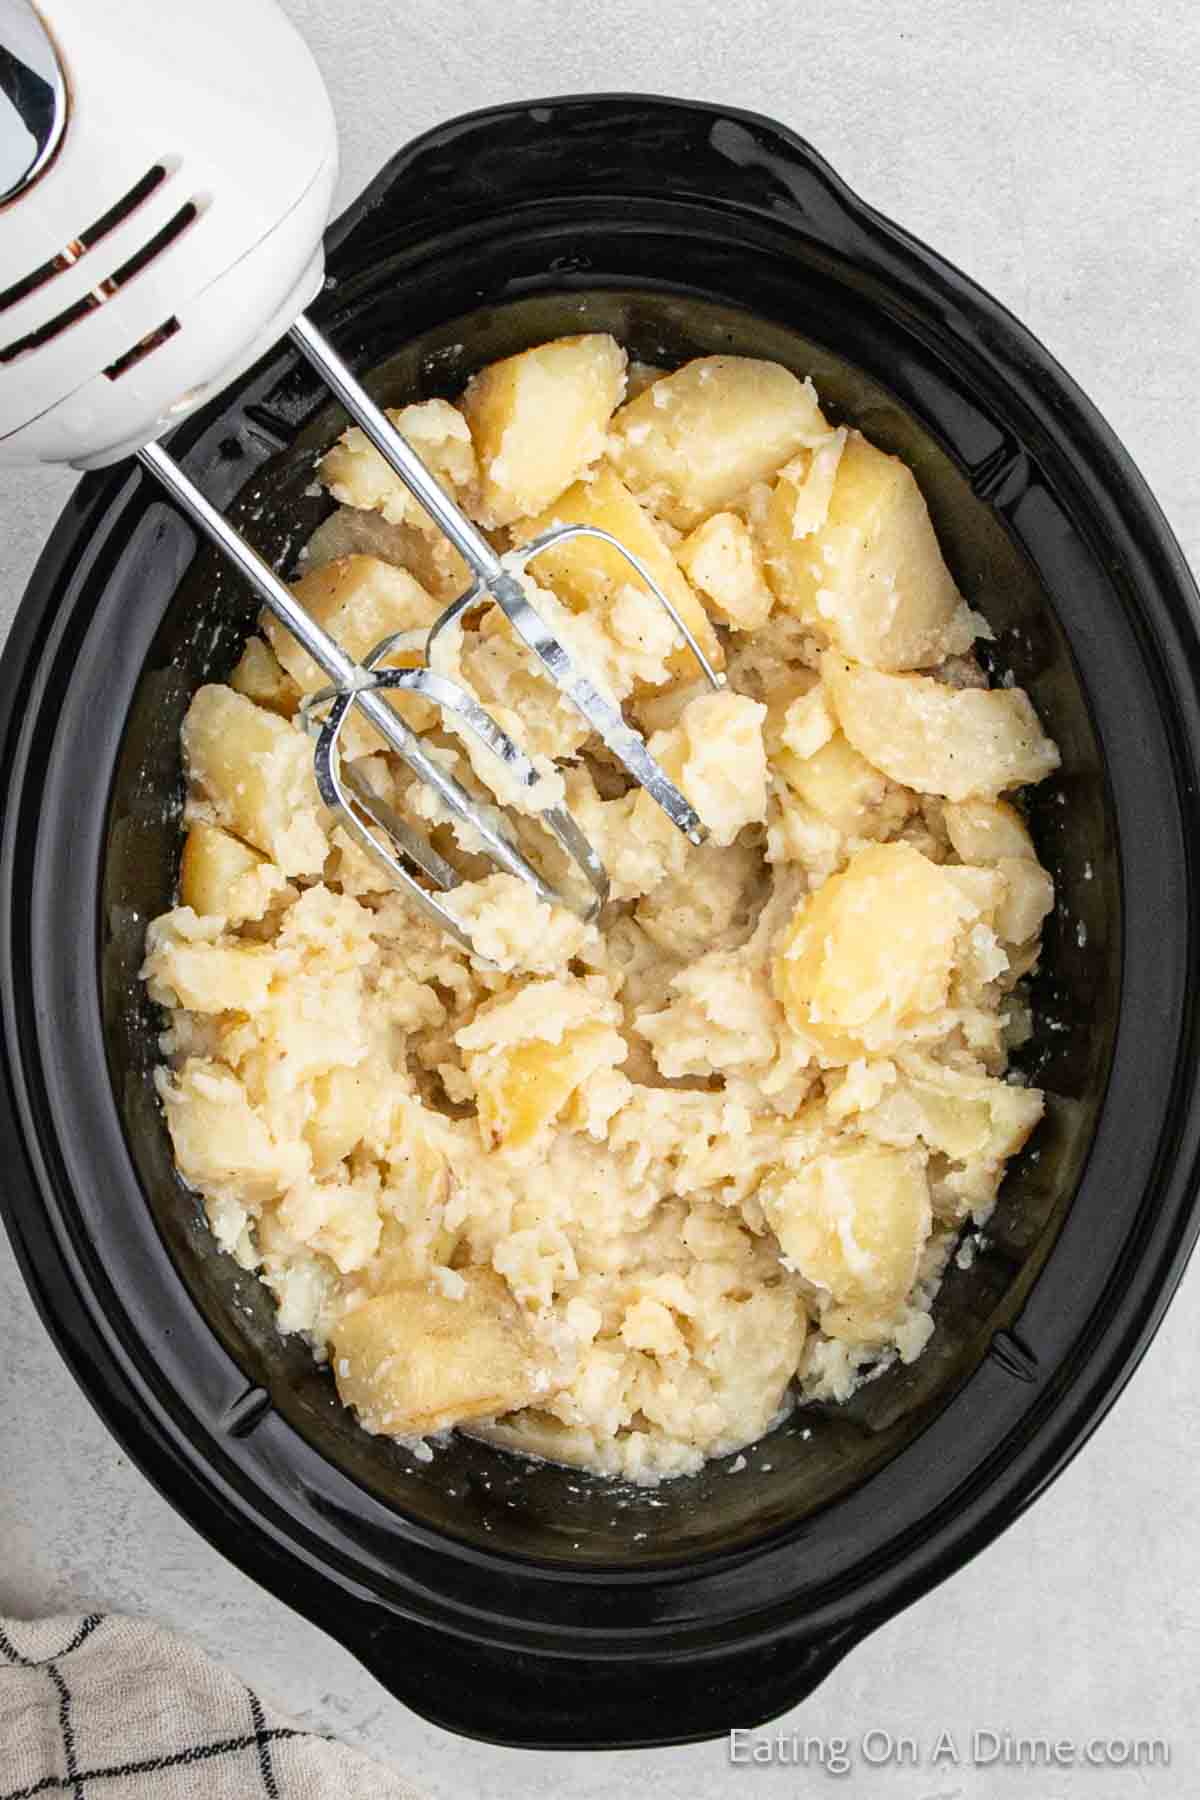 Mash potatoes in the slow cooker with a hand mixer